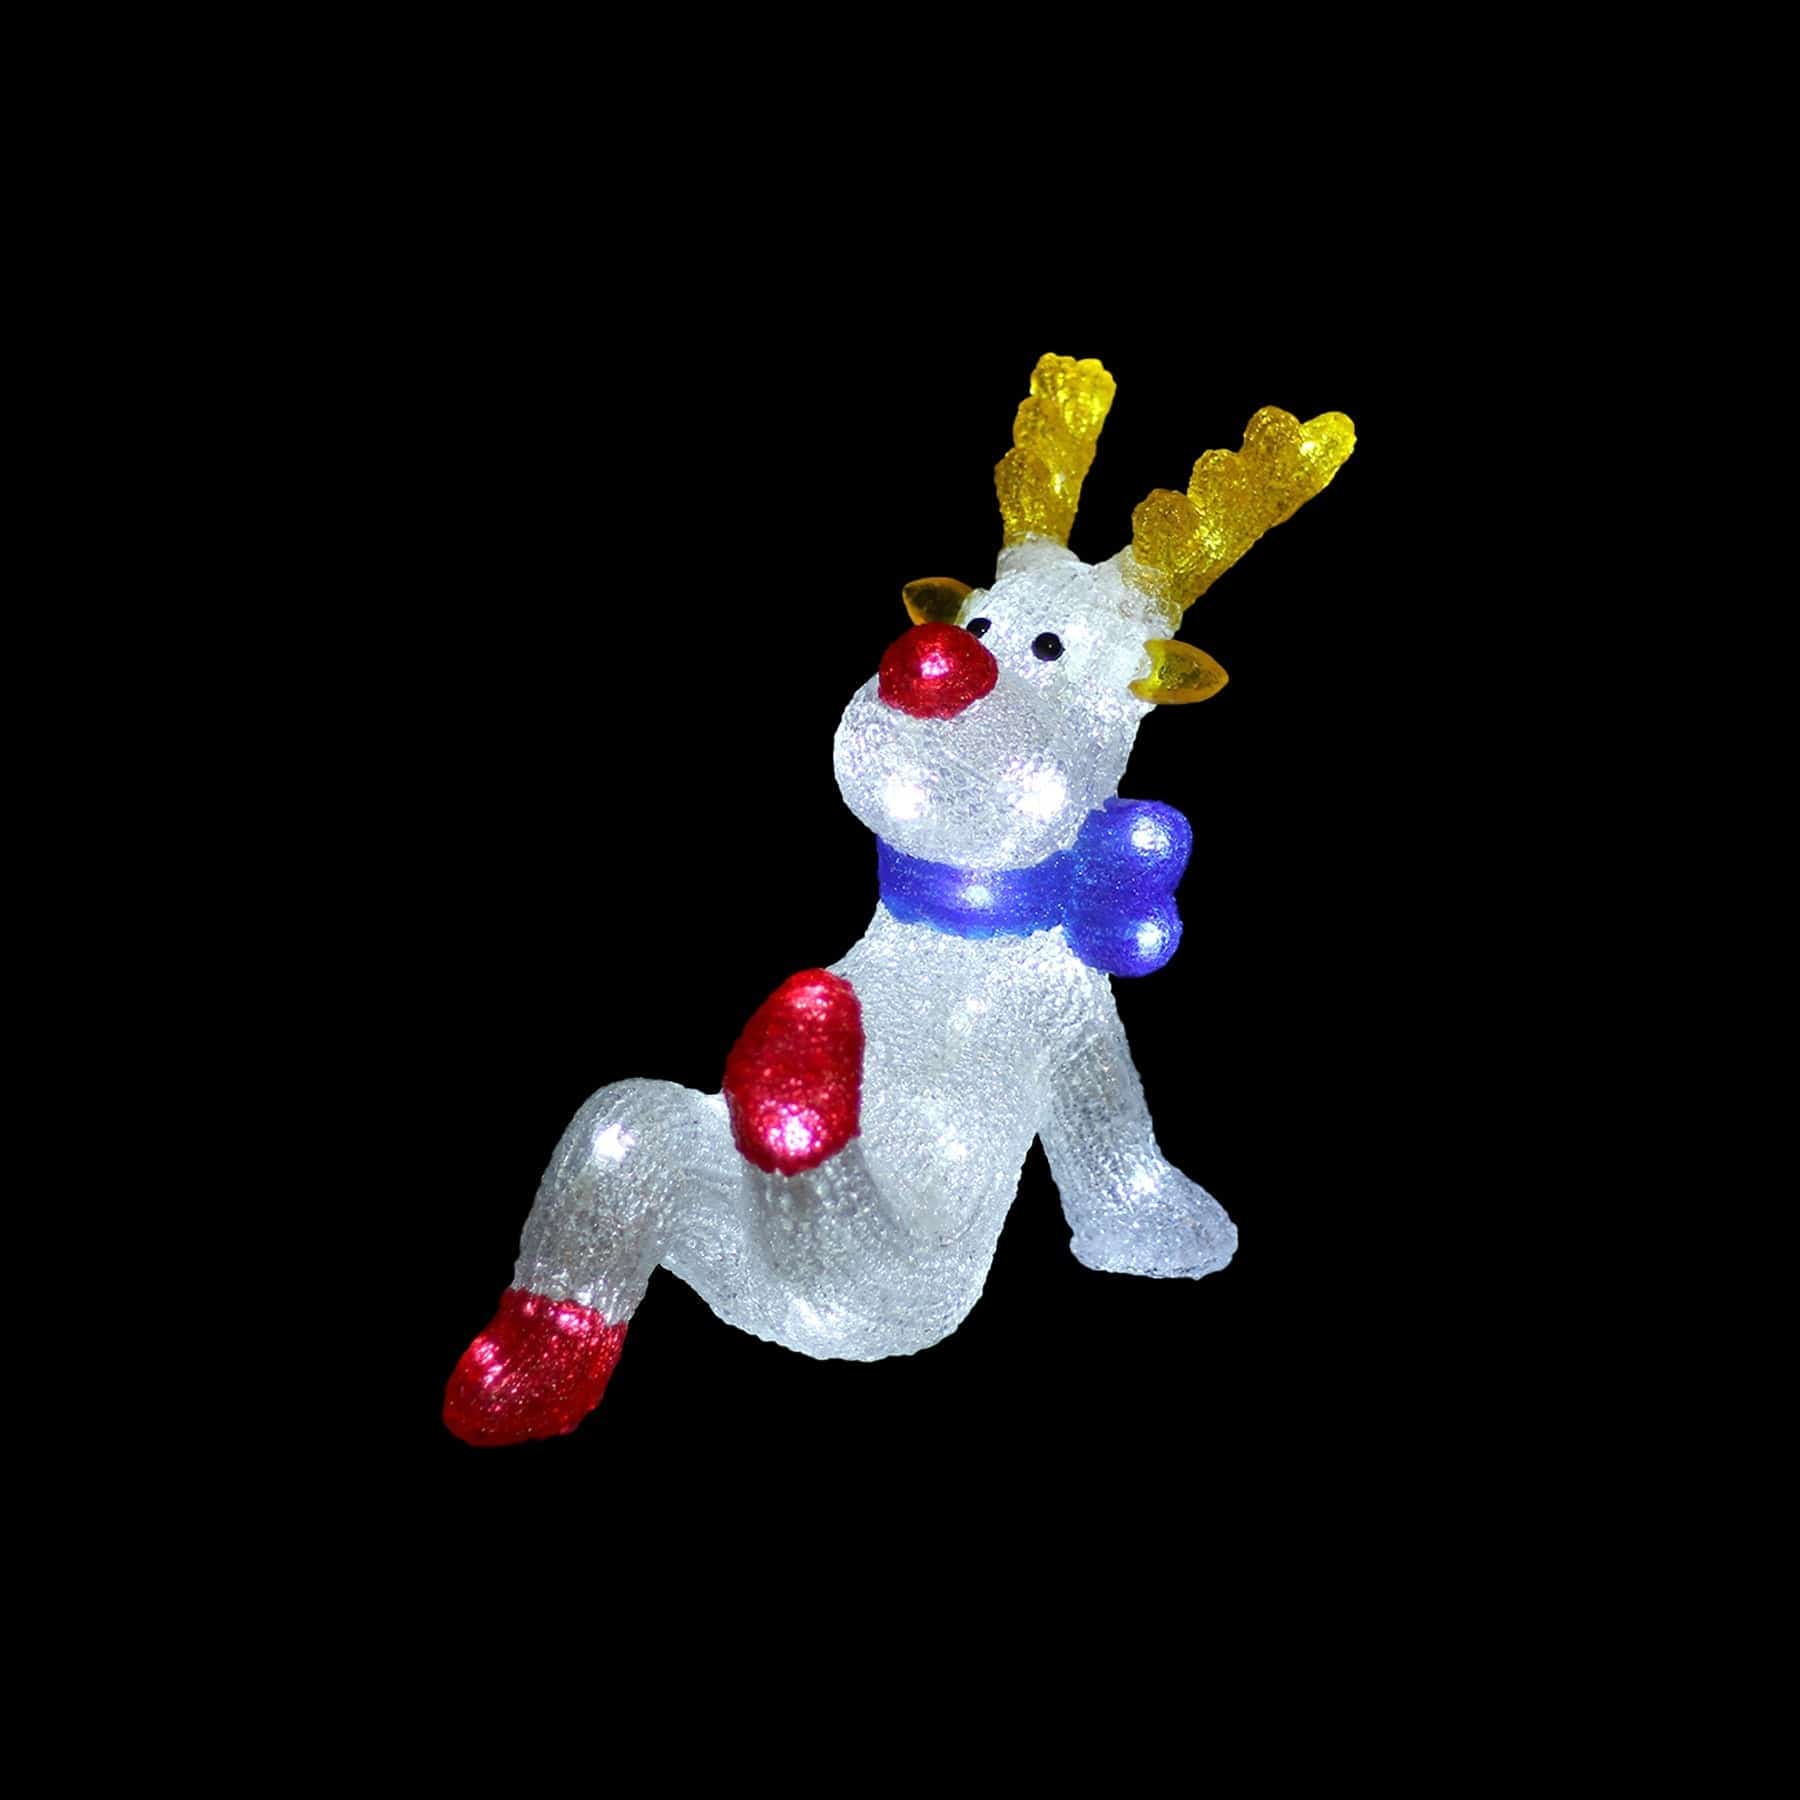 Promo Christmas Figure Acrylic Sitting Red Nose Reindeer - H27cm ACY018-P